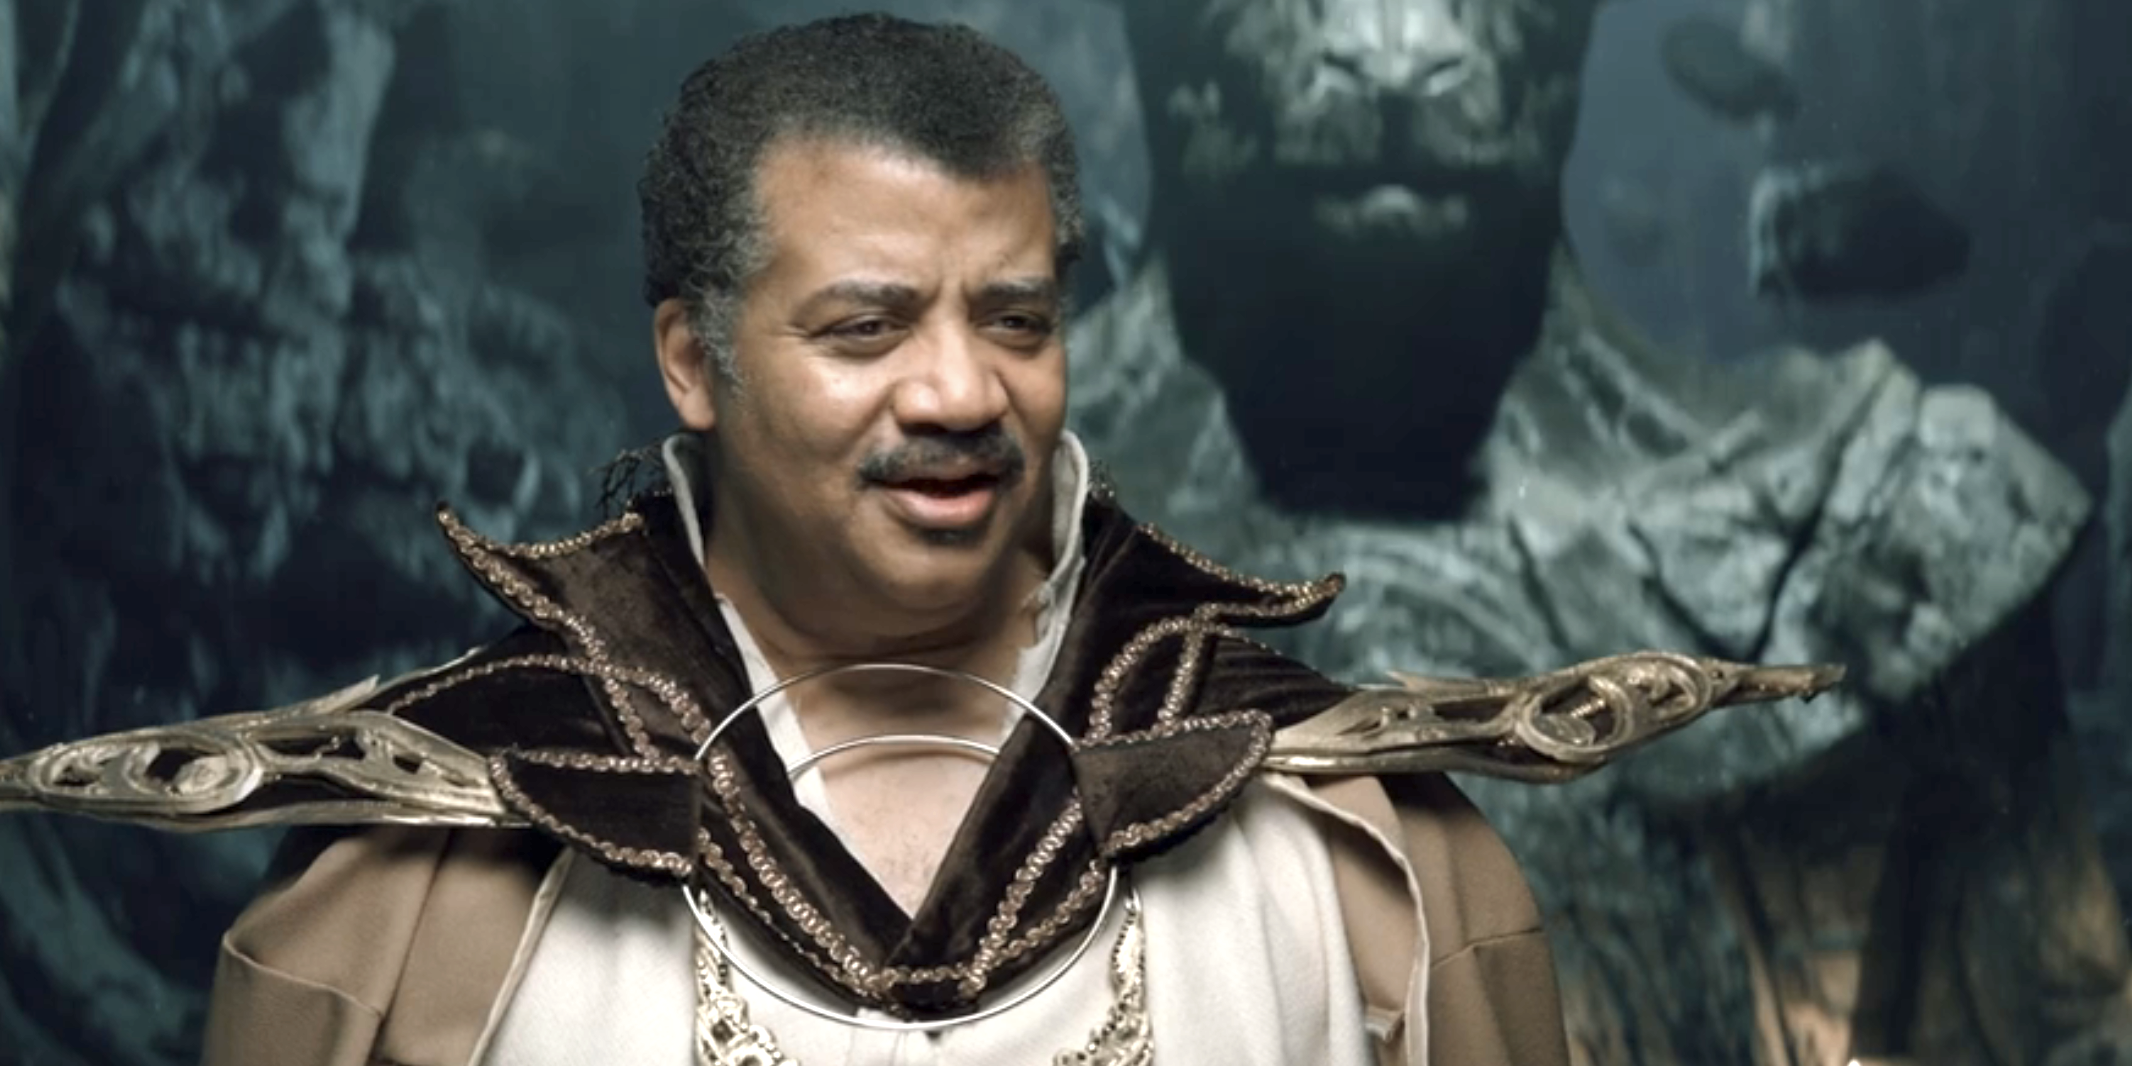 Neil deGrasse Tyson dressed in a cosmic-themed outfit with a decorative collar, on a sci-fi set